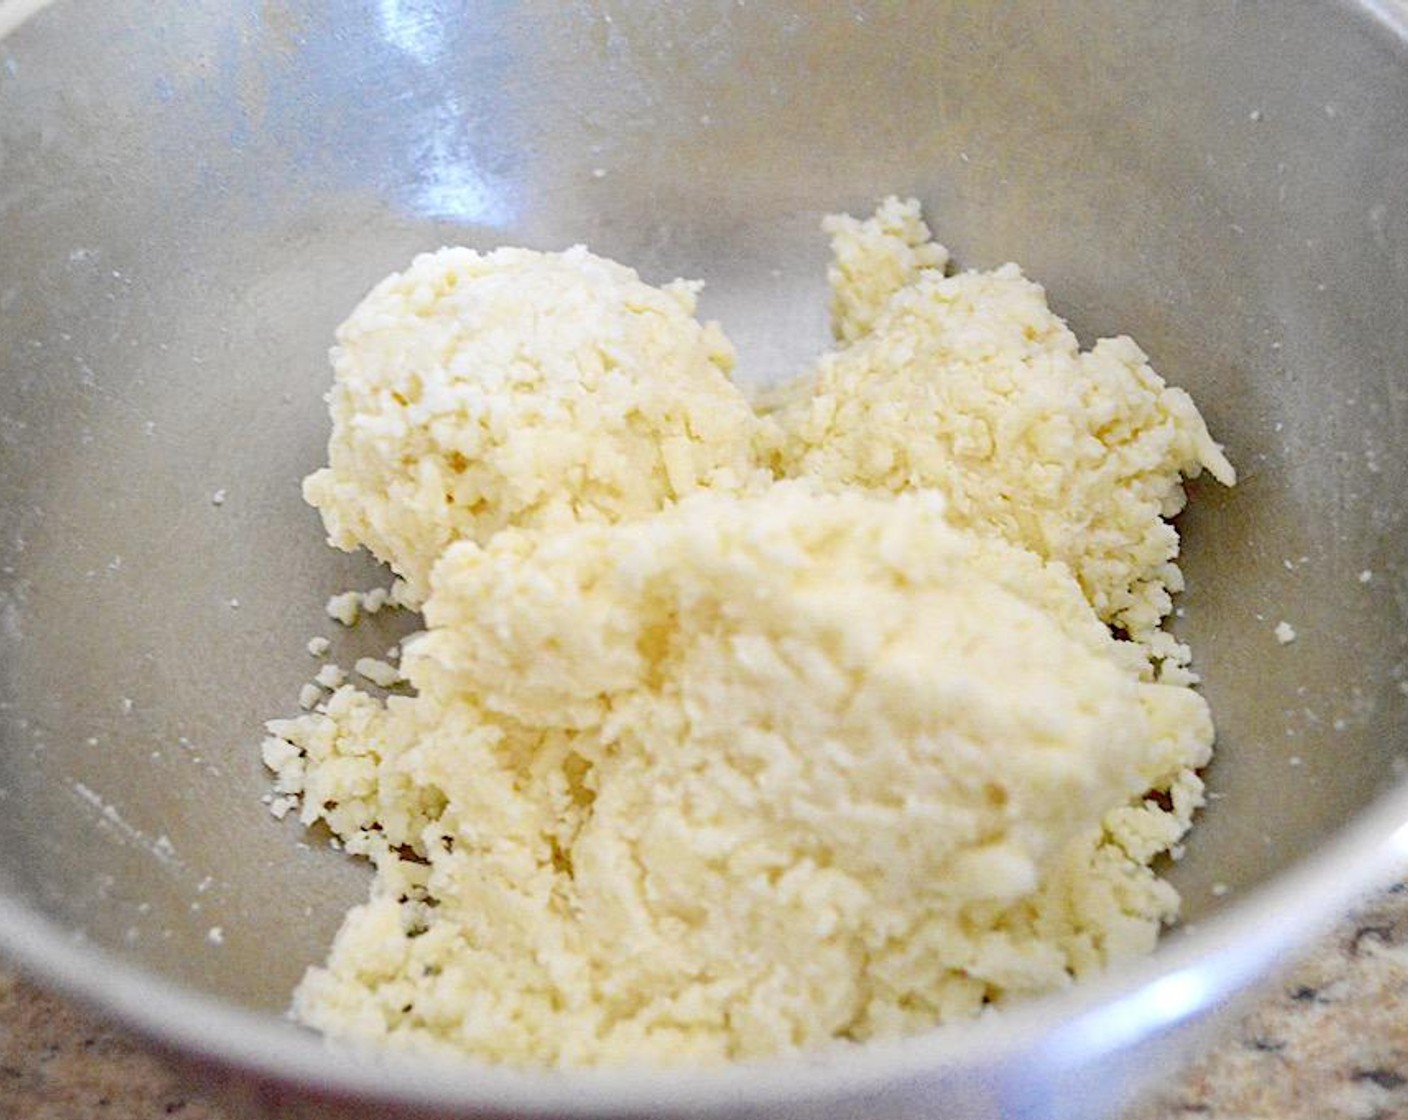 step 6 While it cooks, put together the cheese mixture. Stir Mozzarella Cheese (2 cups), Parmesan Cheese (1/2 cup), and Ricotta Cheese (1/2 cup) together well, then squeeze it together with clean hands into a fairly solid mixture.